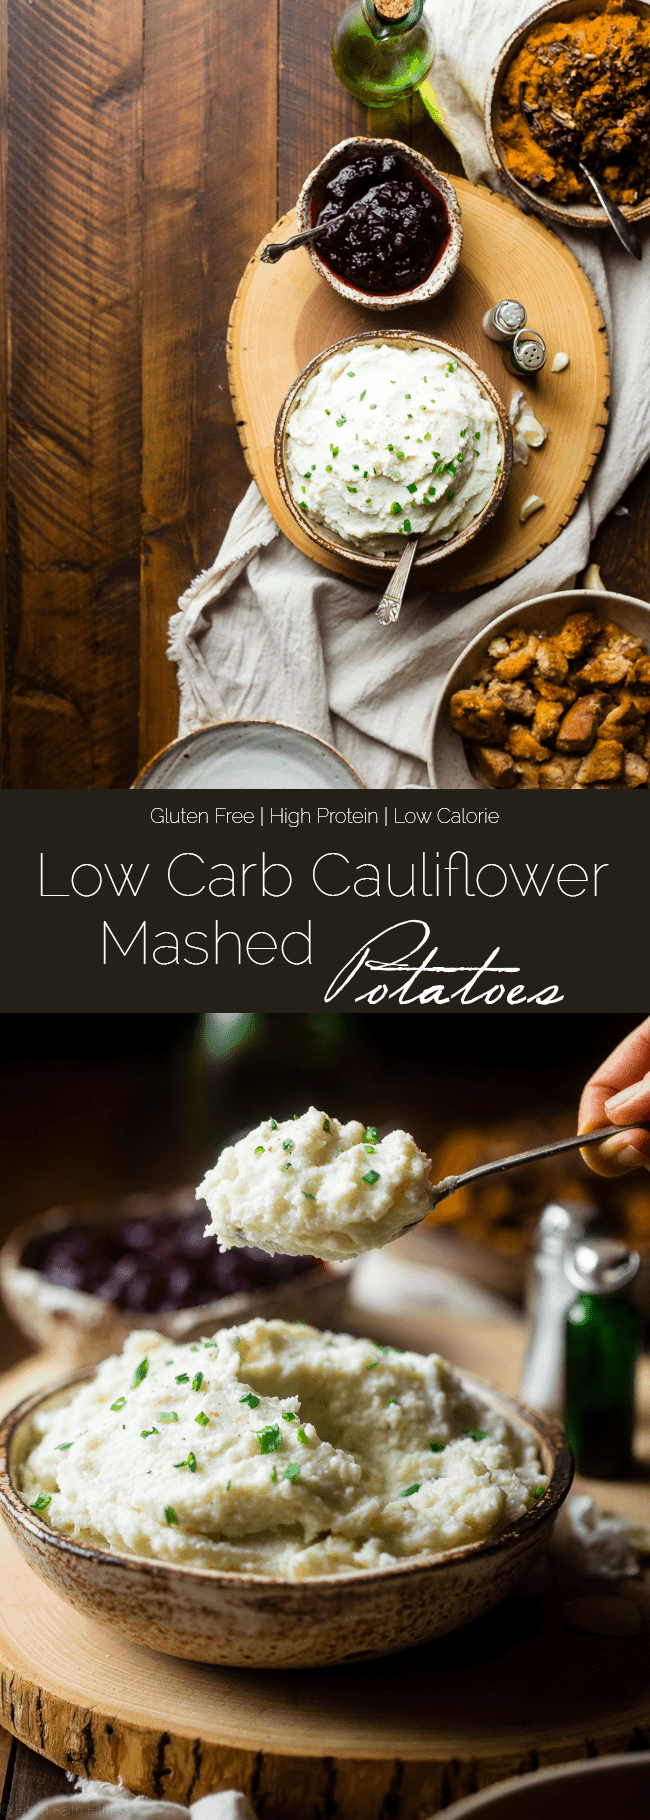 5 Ingredient Cauliflower Mashed Potatoes - These quick and easy, low carb cauliflower mashed potatoes only have 5 ingredients, 62 calories, 1 SmartPoint and use a secret ingredient to pack them with protein! Perfect for a healthy Thanksgiving! | Foodfaithfitness.com | @FoodFaithFit